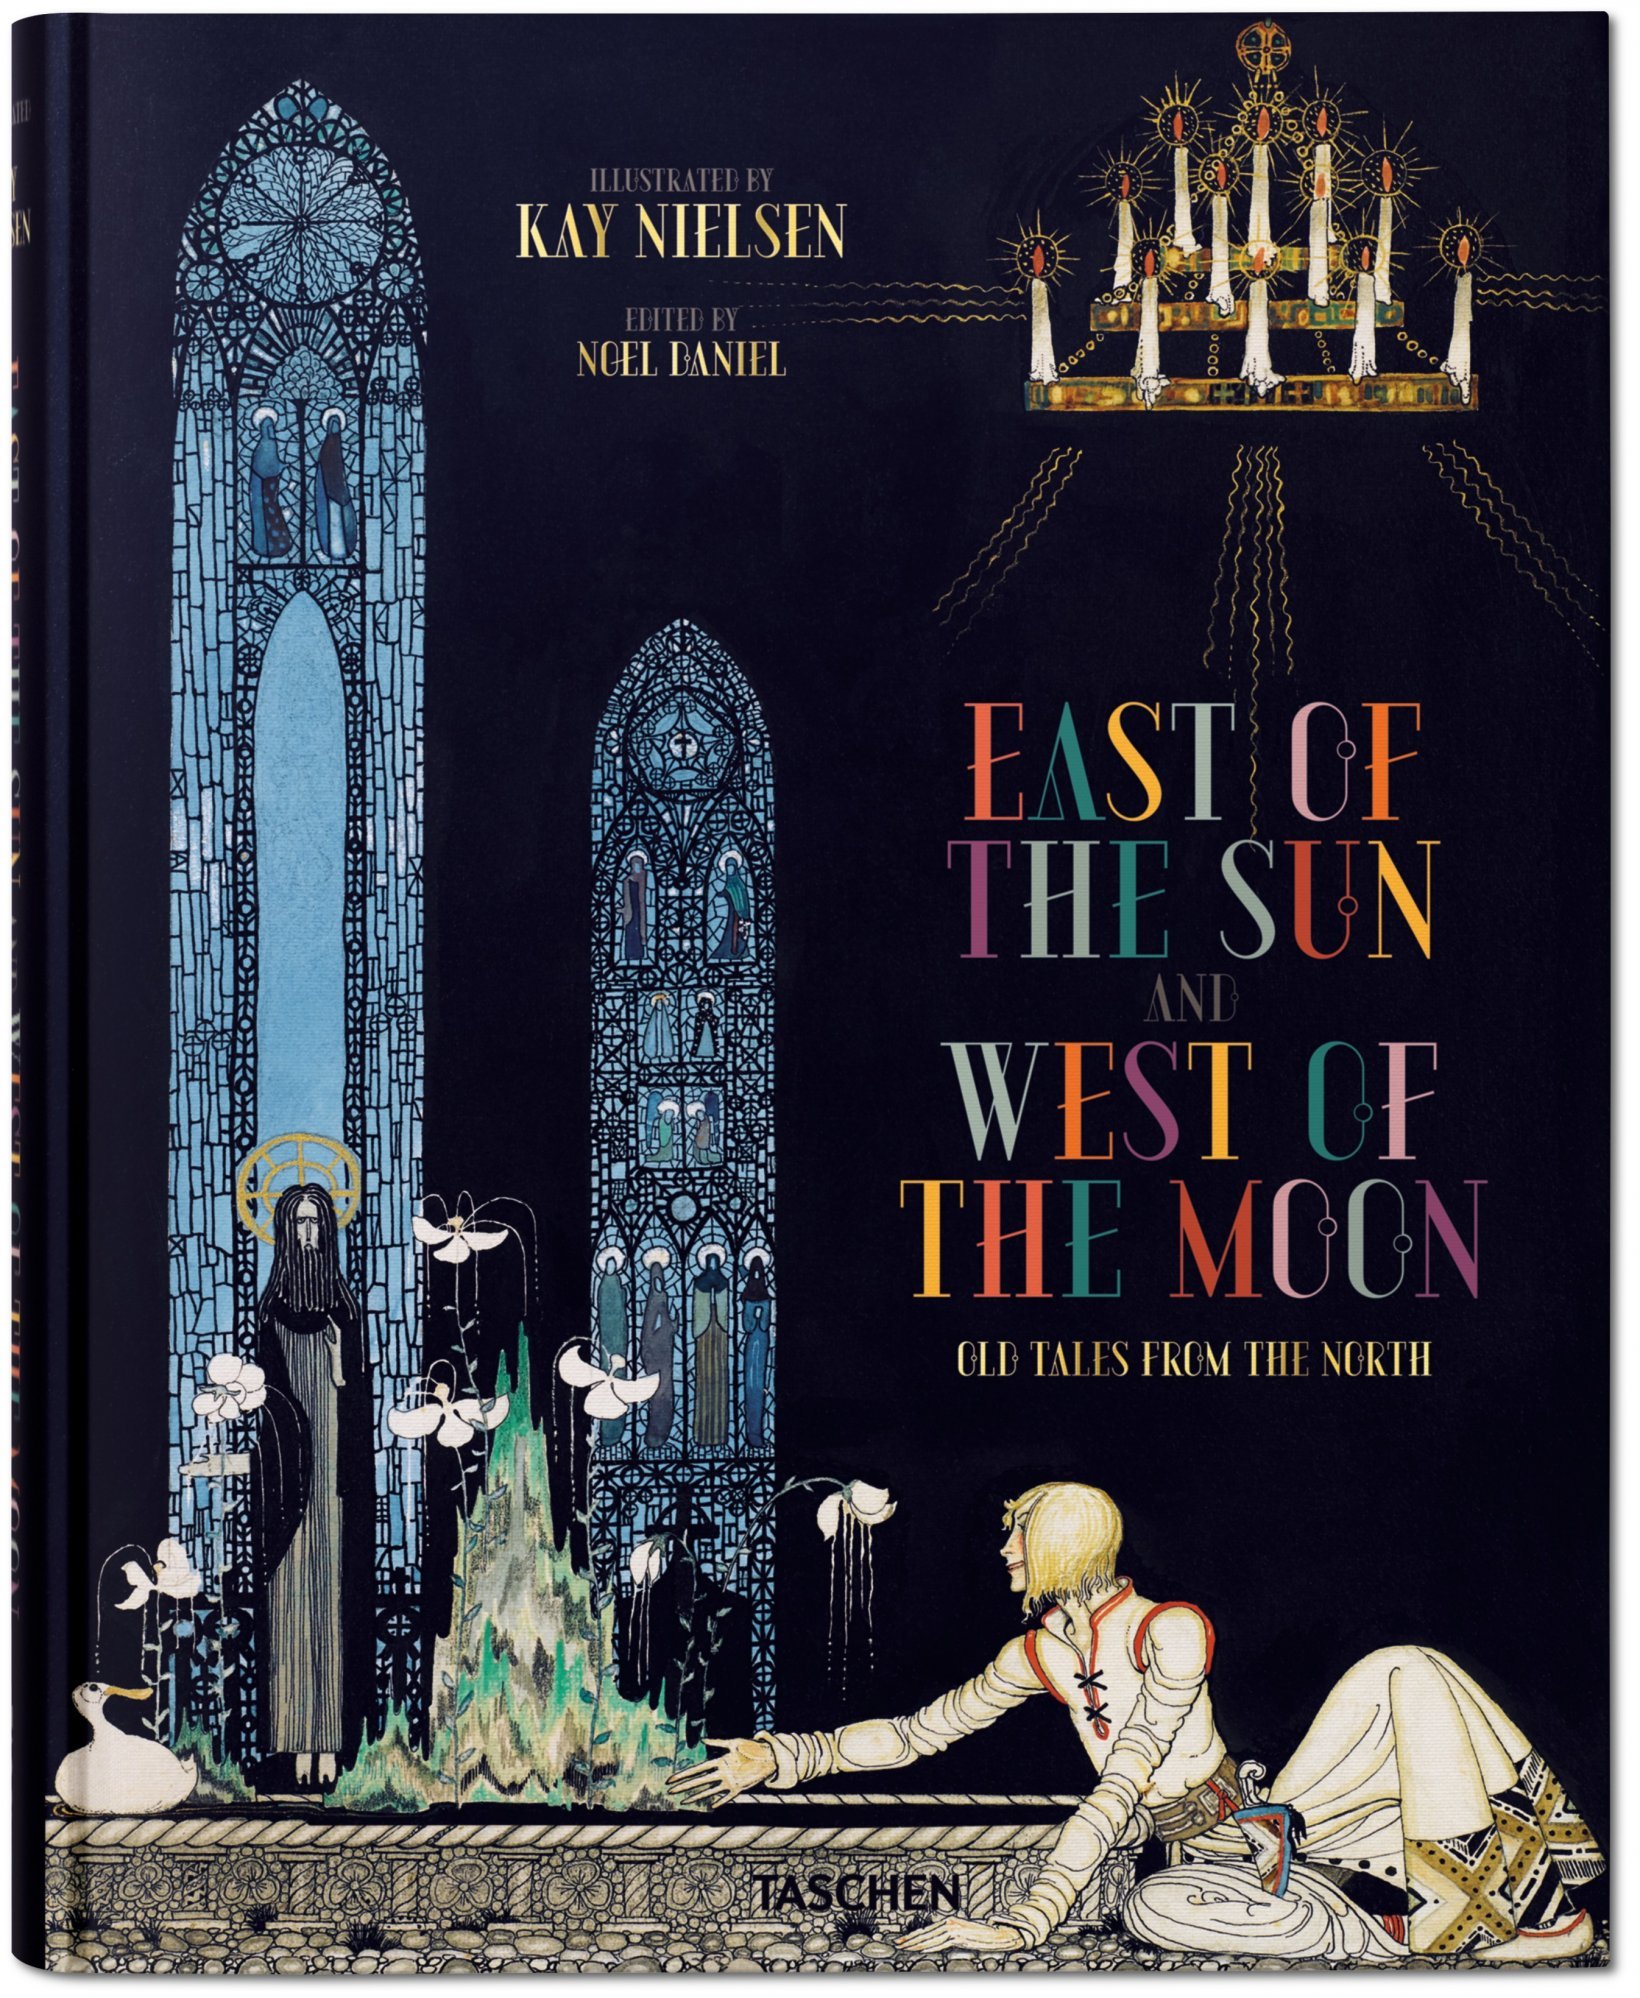 Kay Nielsen: East of the Sun and West of the Moon goodnight moon